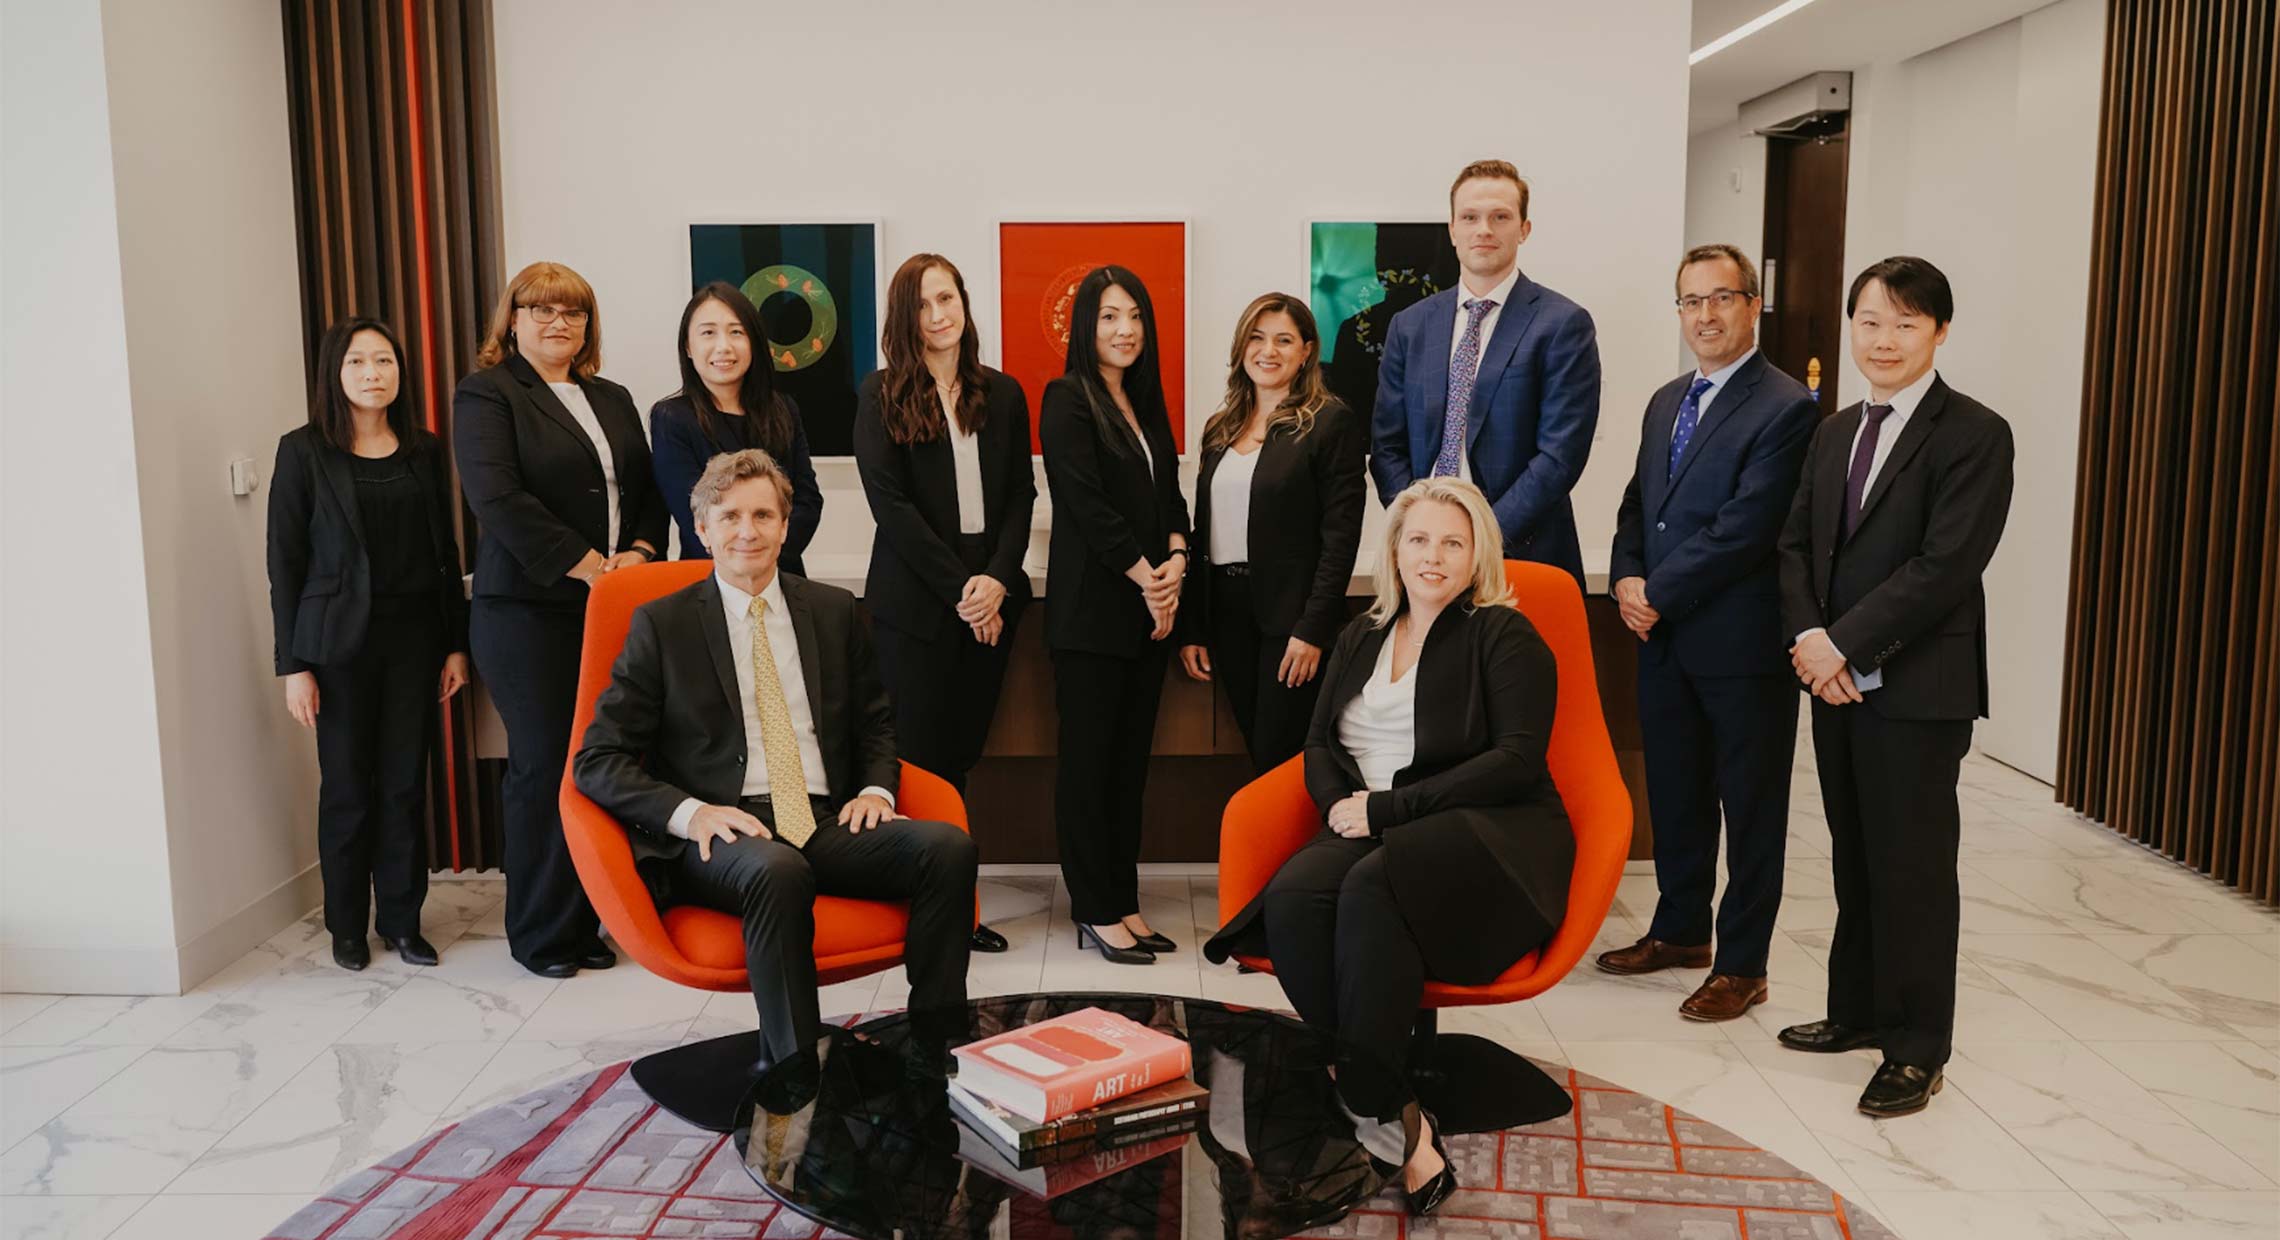 The Farwell Group - Scotia Wealth Management Team Photo